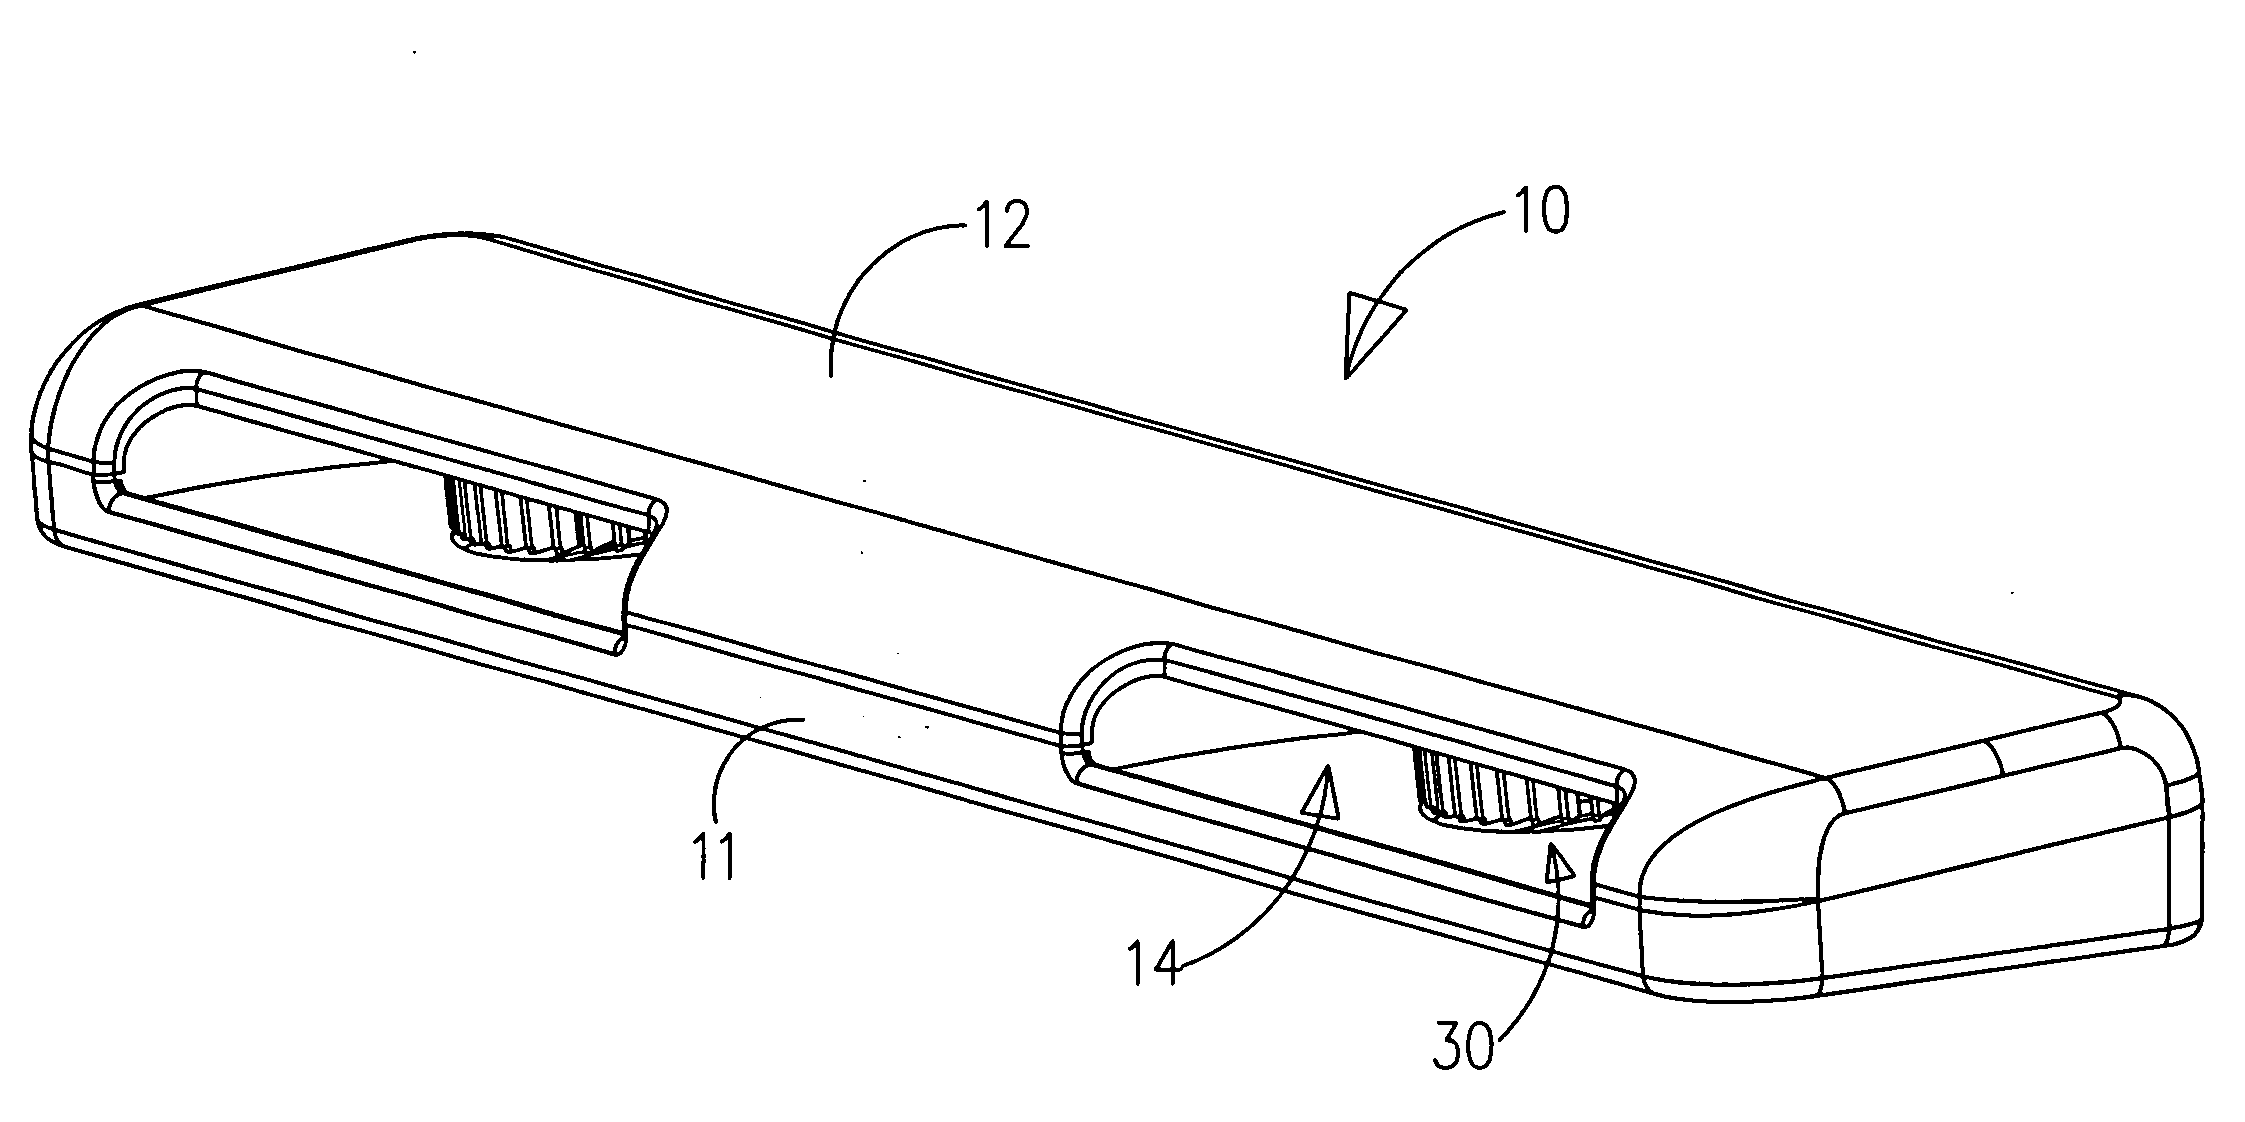 Heat dissipation device for portable computer